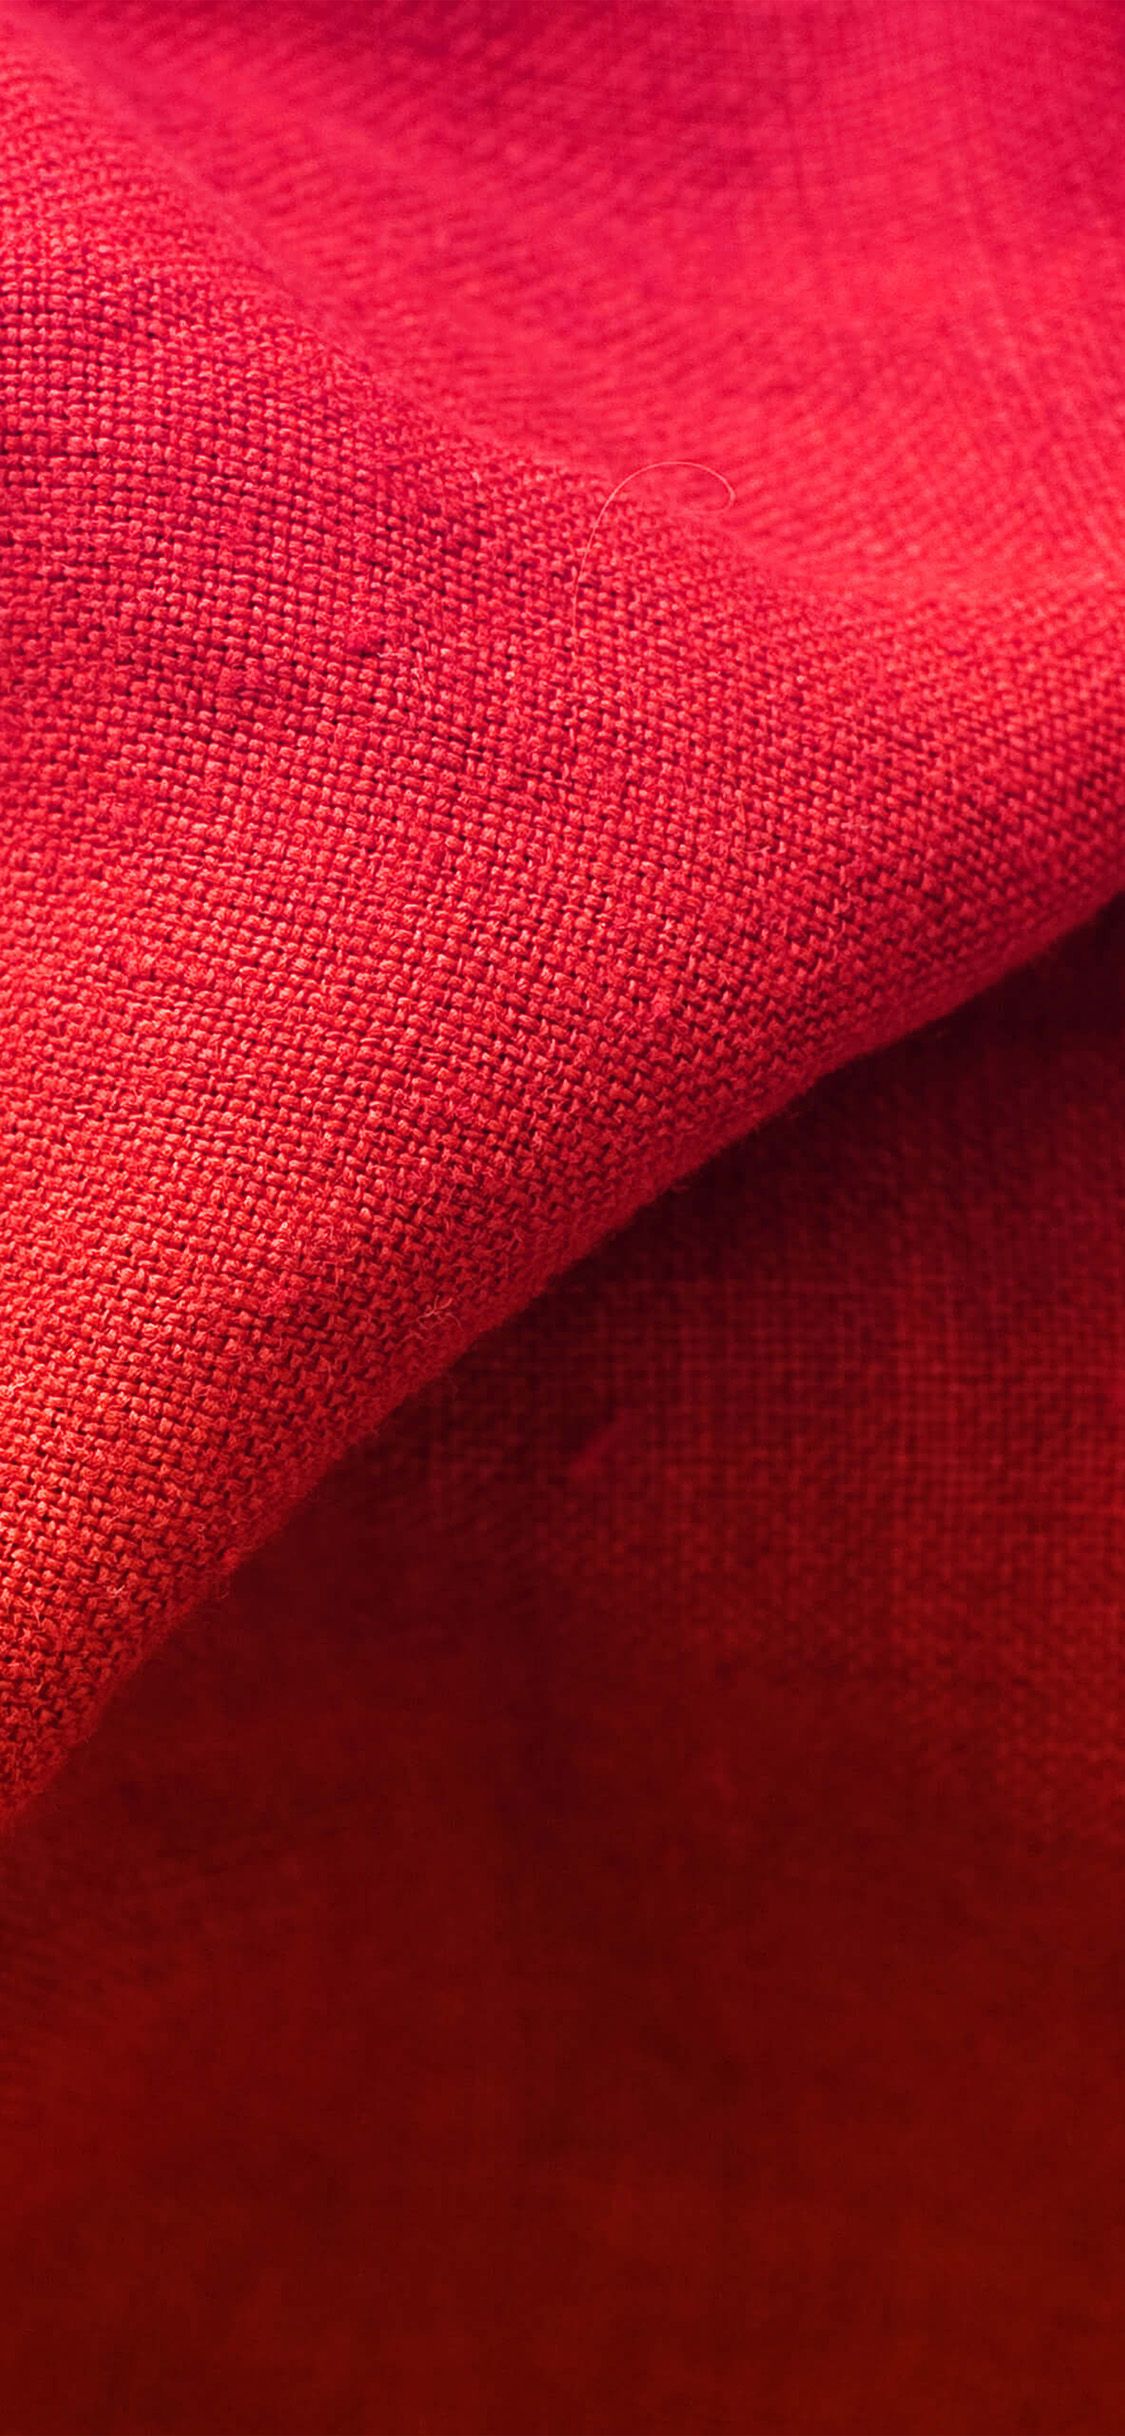 iPhone X wallpaper. fabric red texture